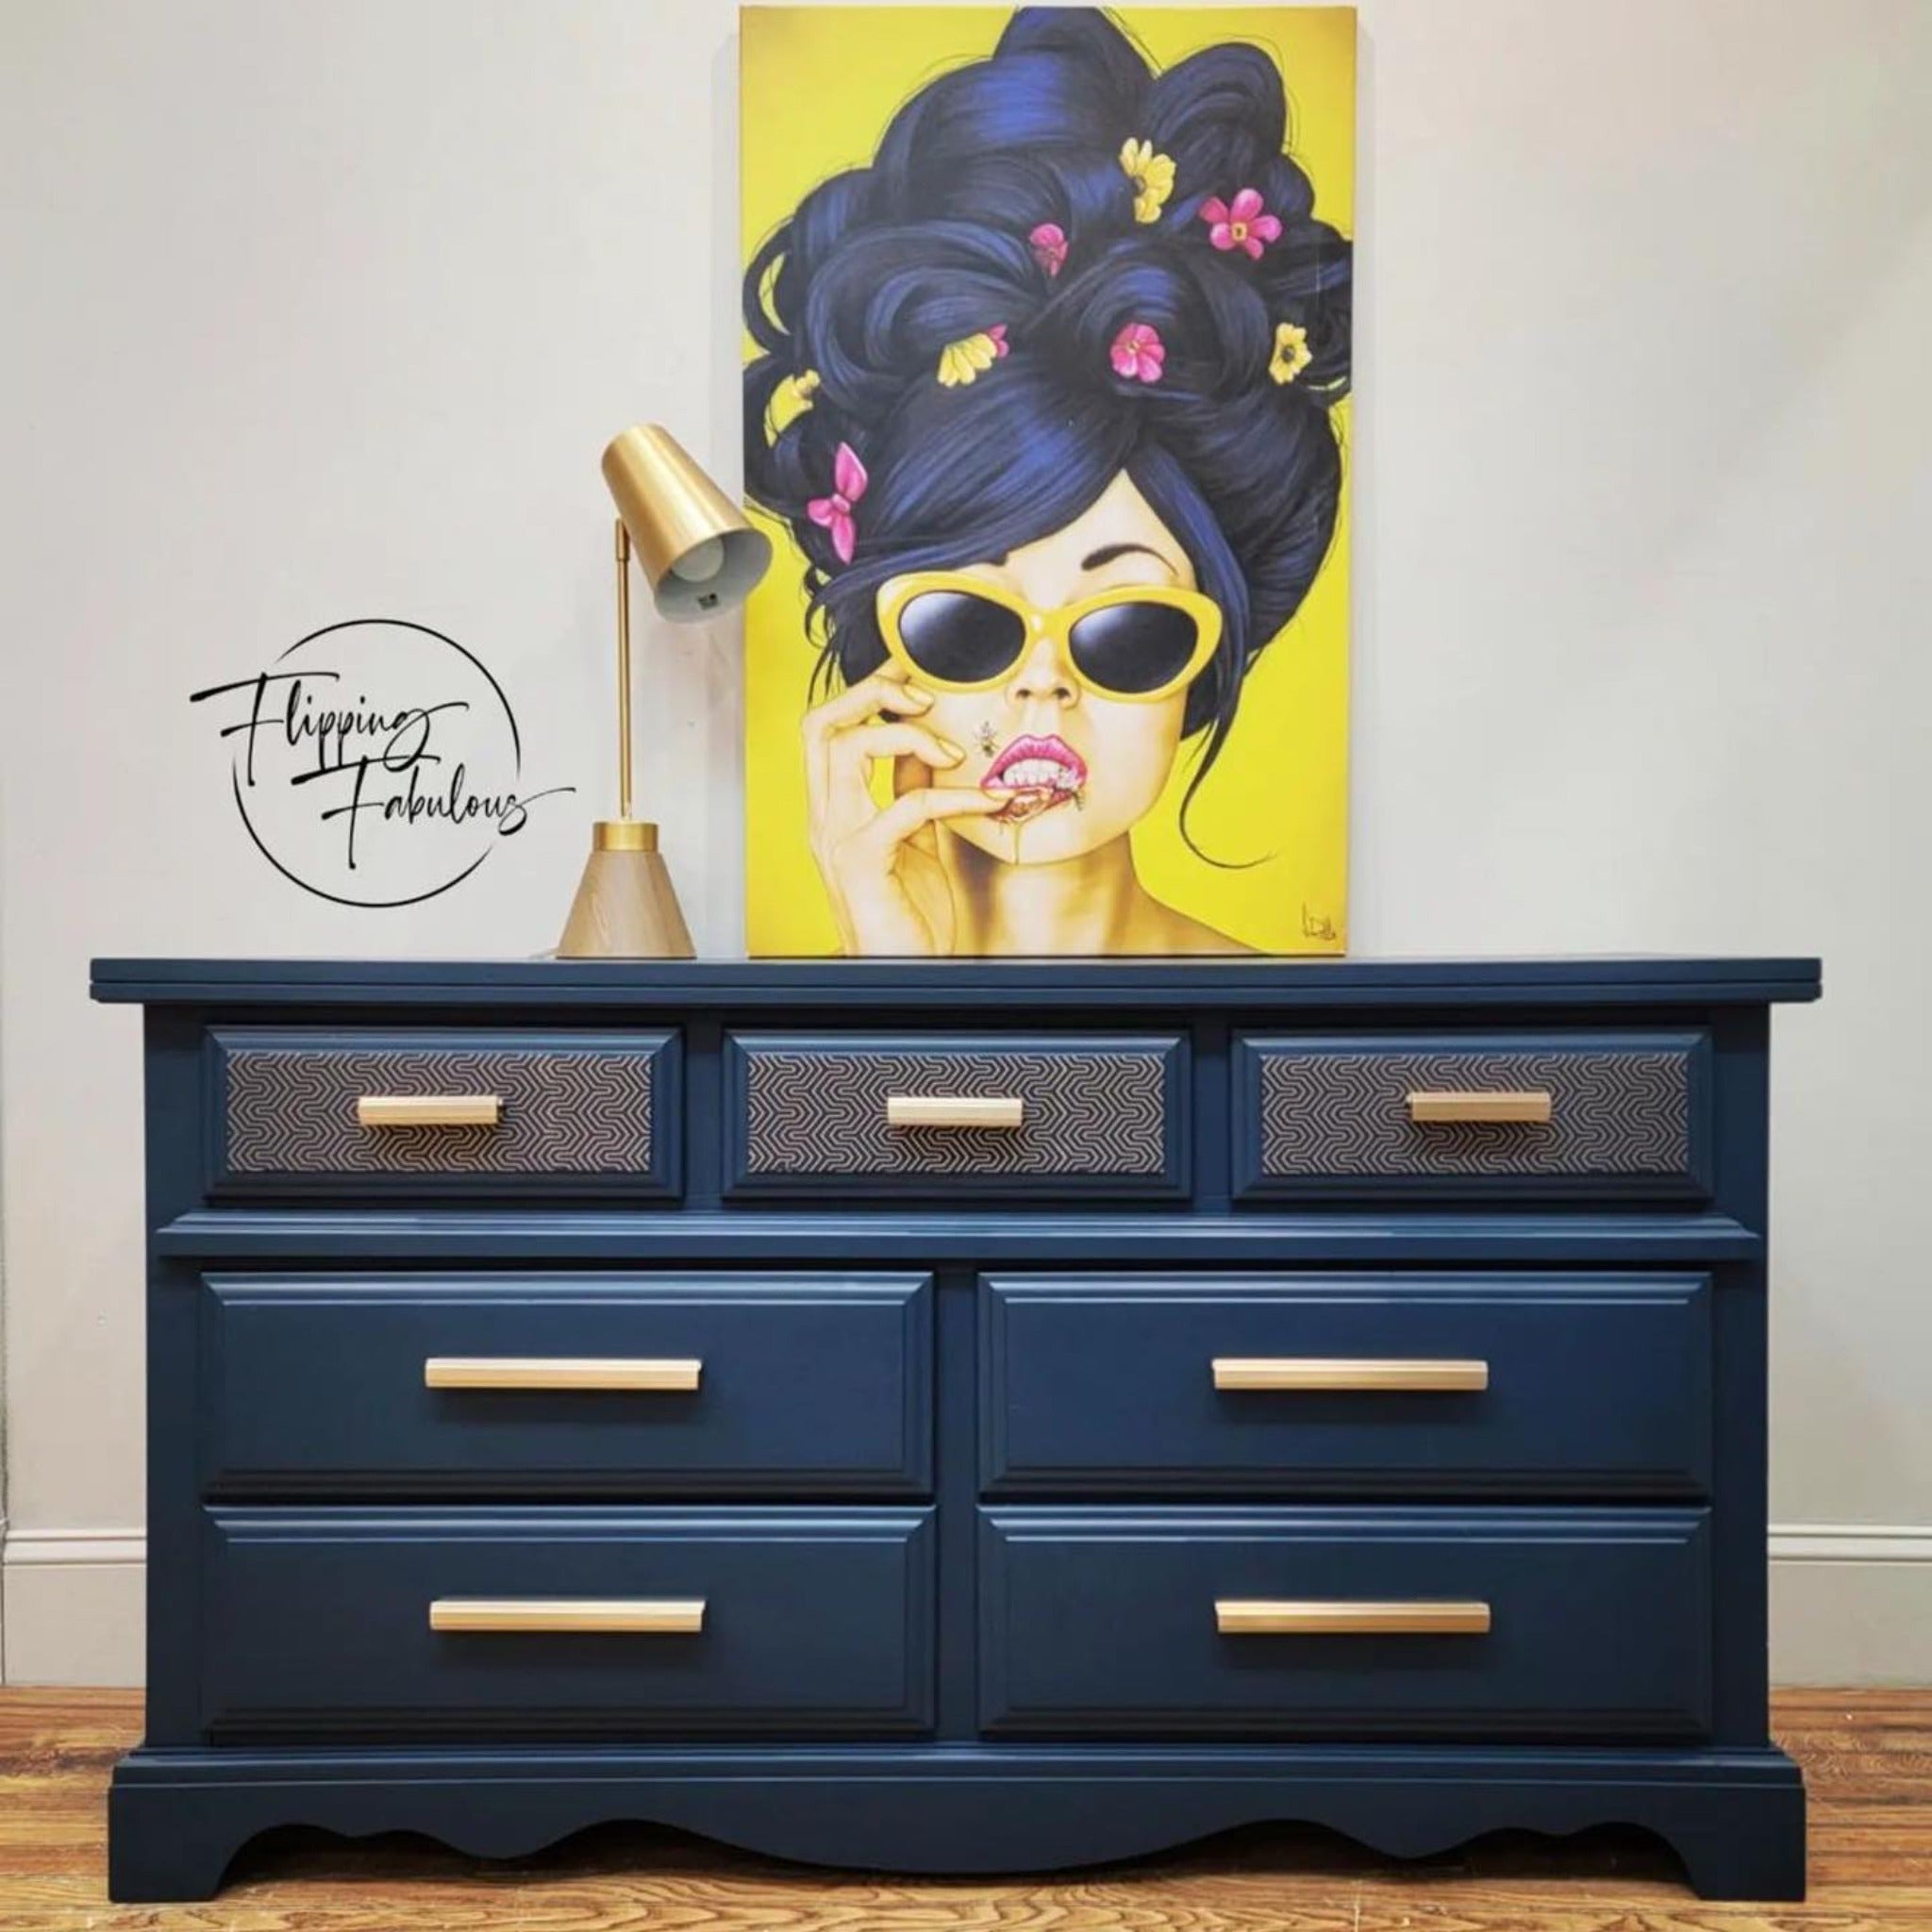 A 7-drawer dresser refurbished by Flipping Fabulous is painted blue and features ReDesign with Prima's Motif Geometrique small transfer on its top 3 small drawers.